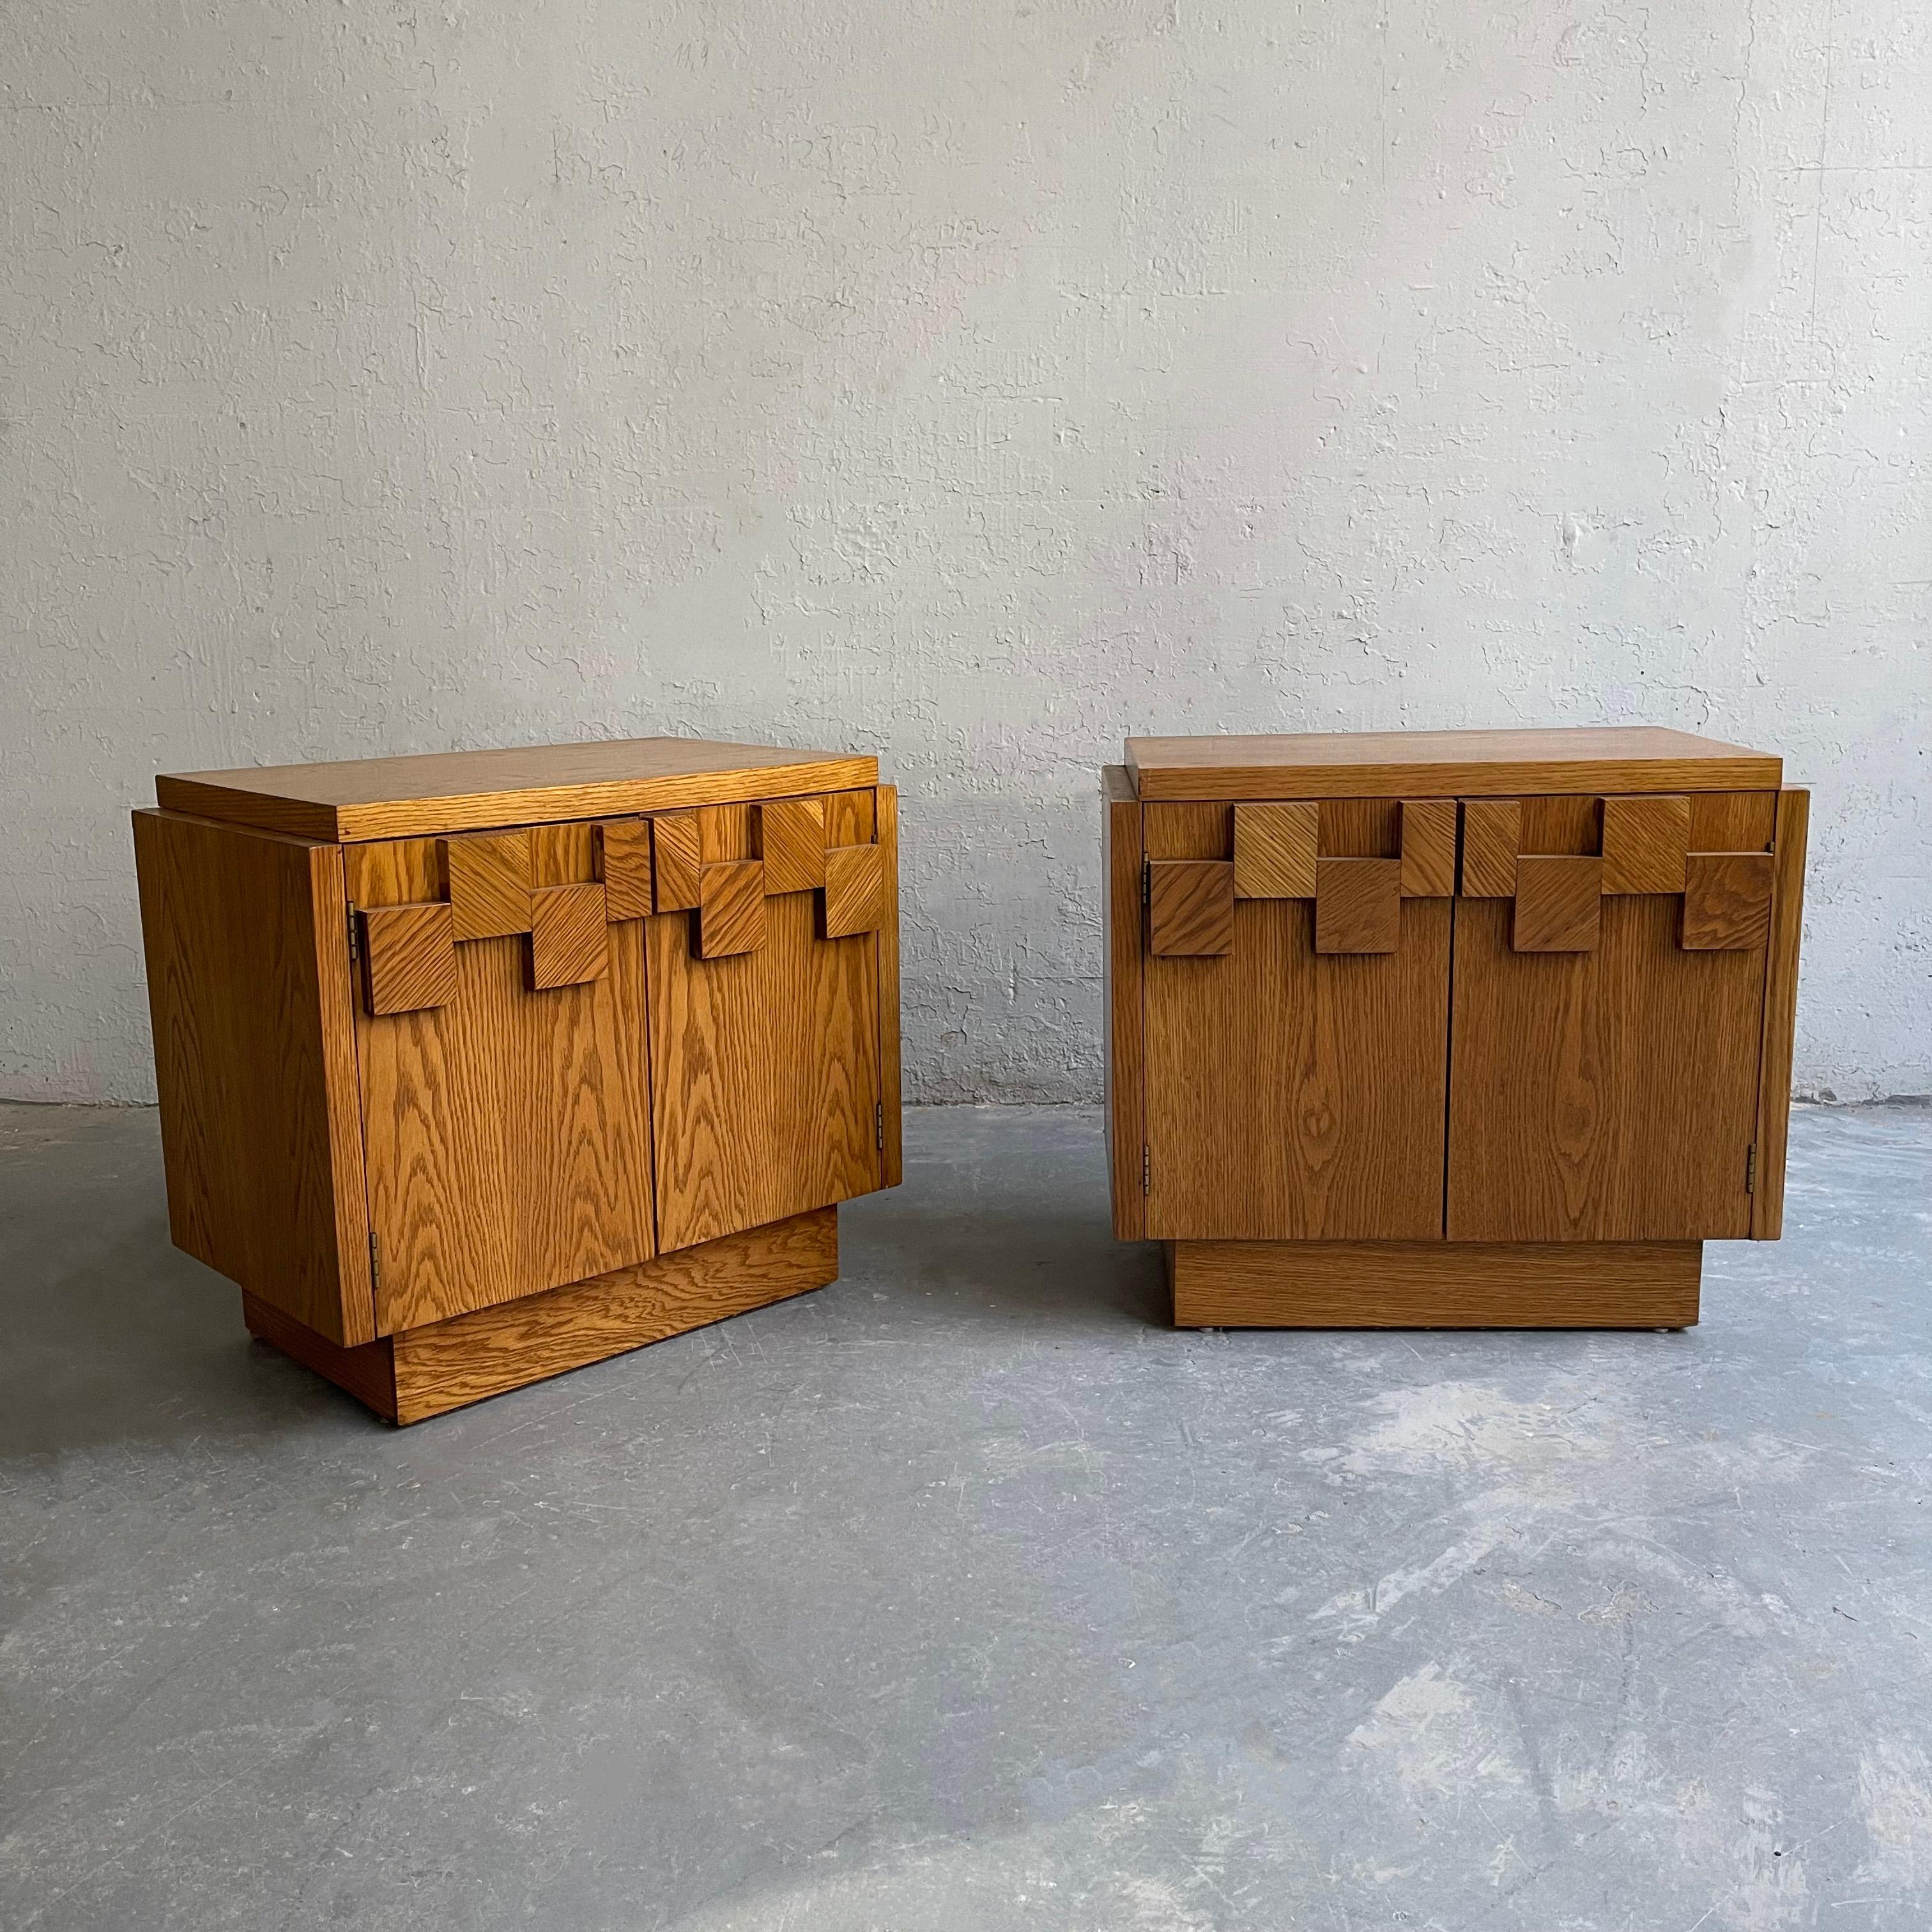 Pair of brutalist, Mid-Century Modern, oak nightstands or end tables by Lane feature decorative mosaic drawer fronts. They are newly finished in a rich, medium oak tone.